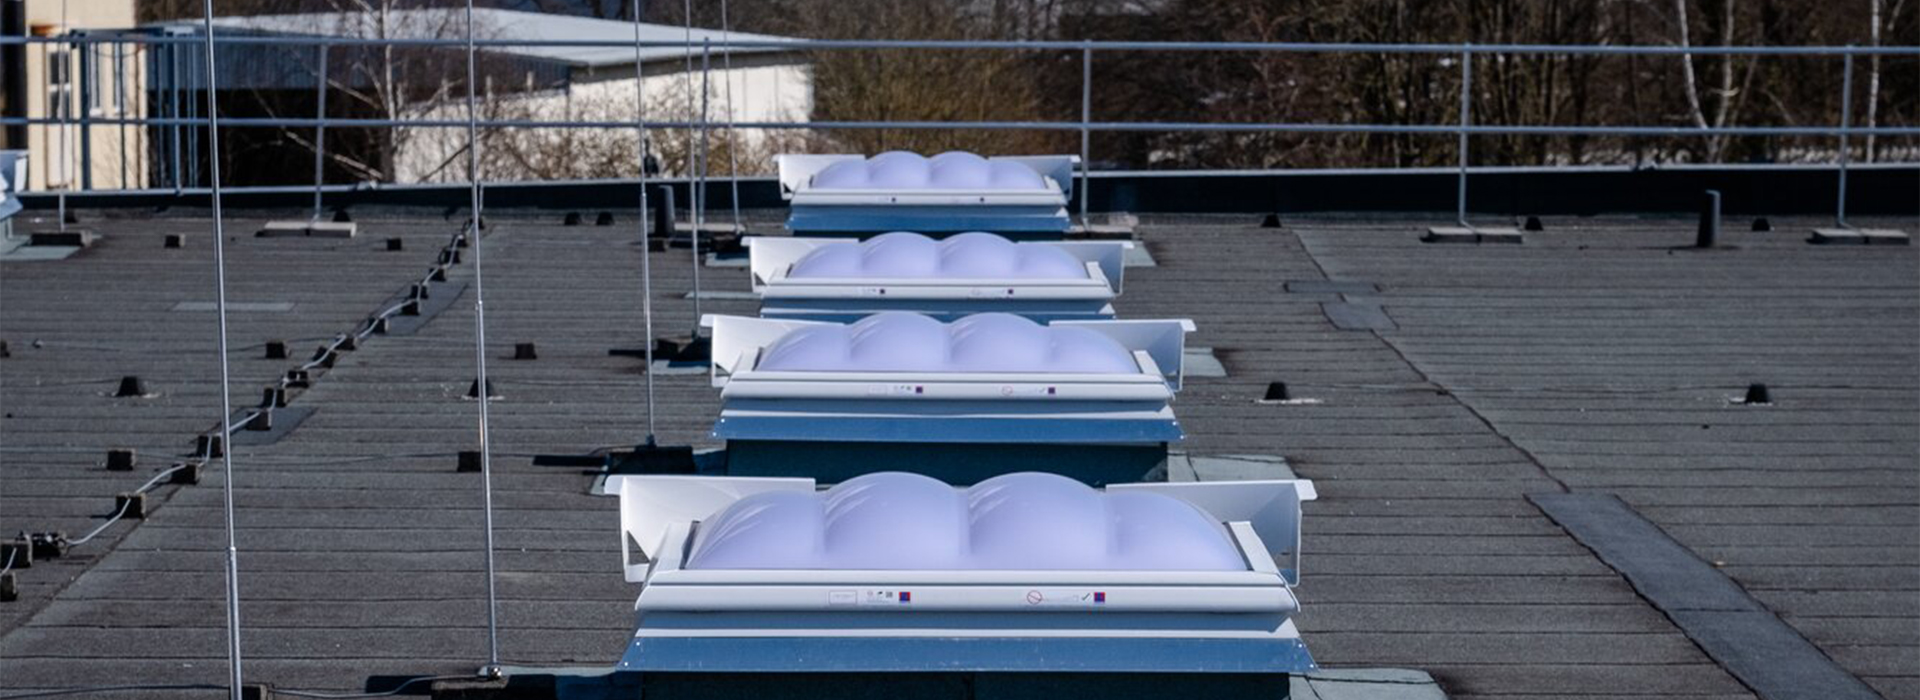 rooflight dome on flat roof